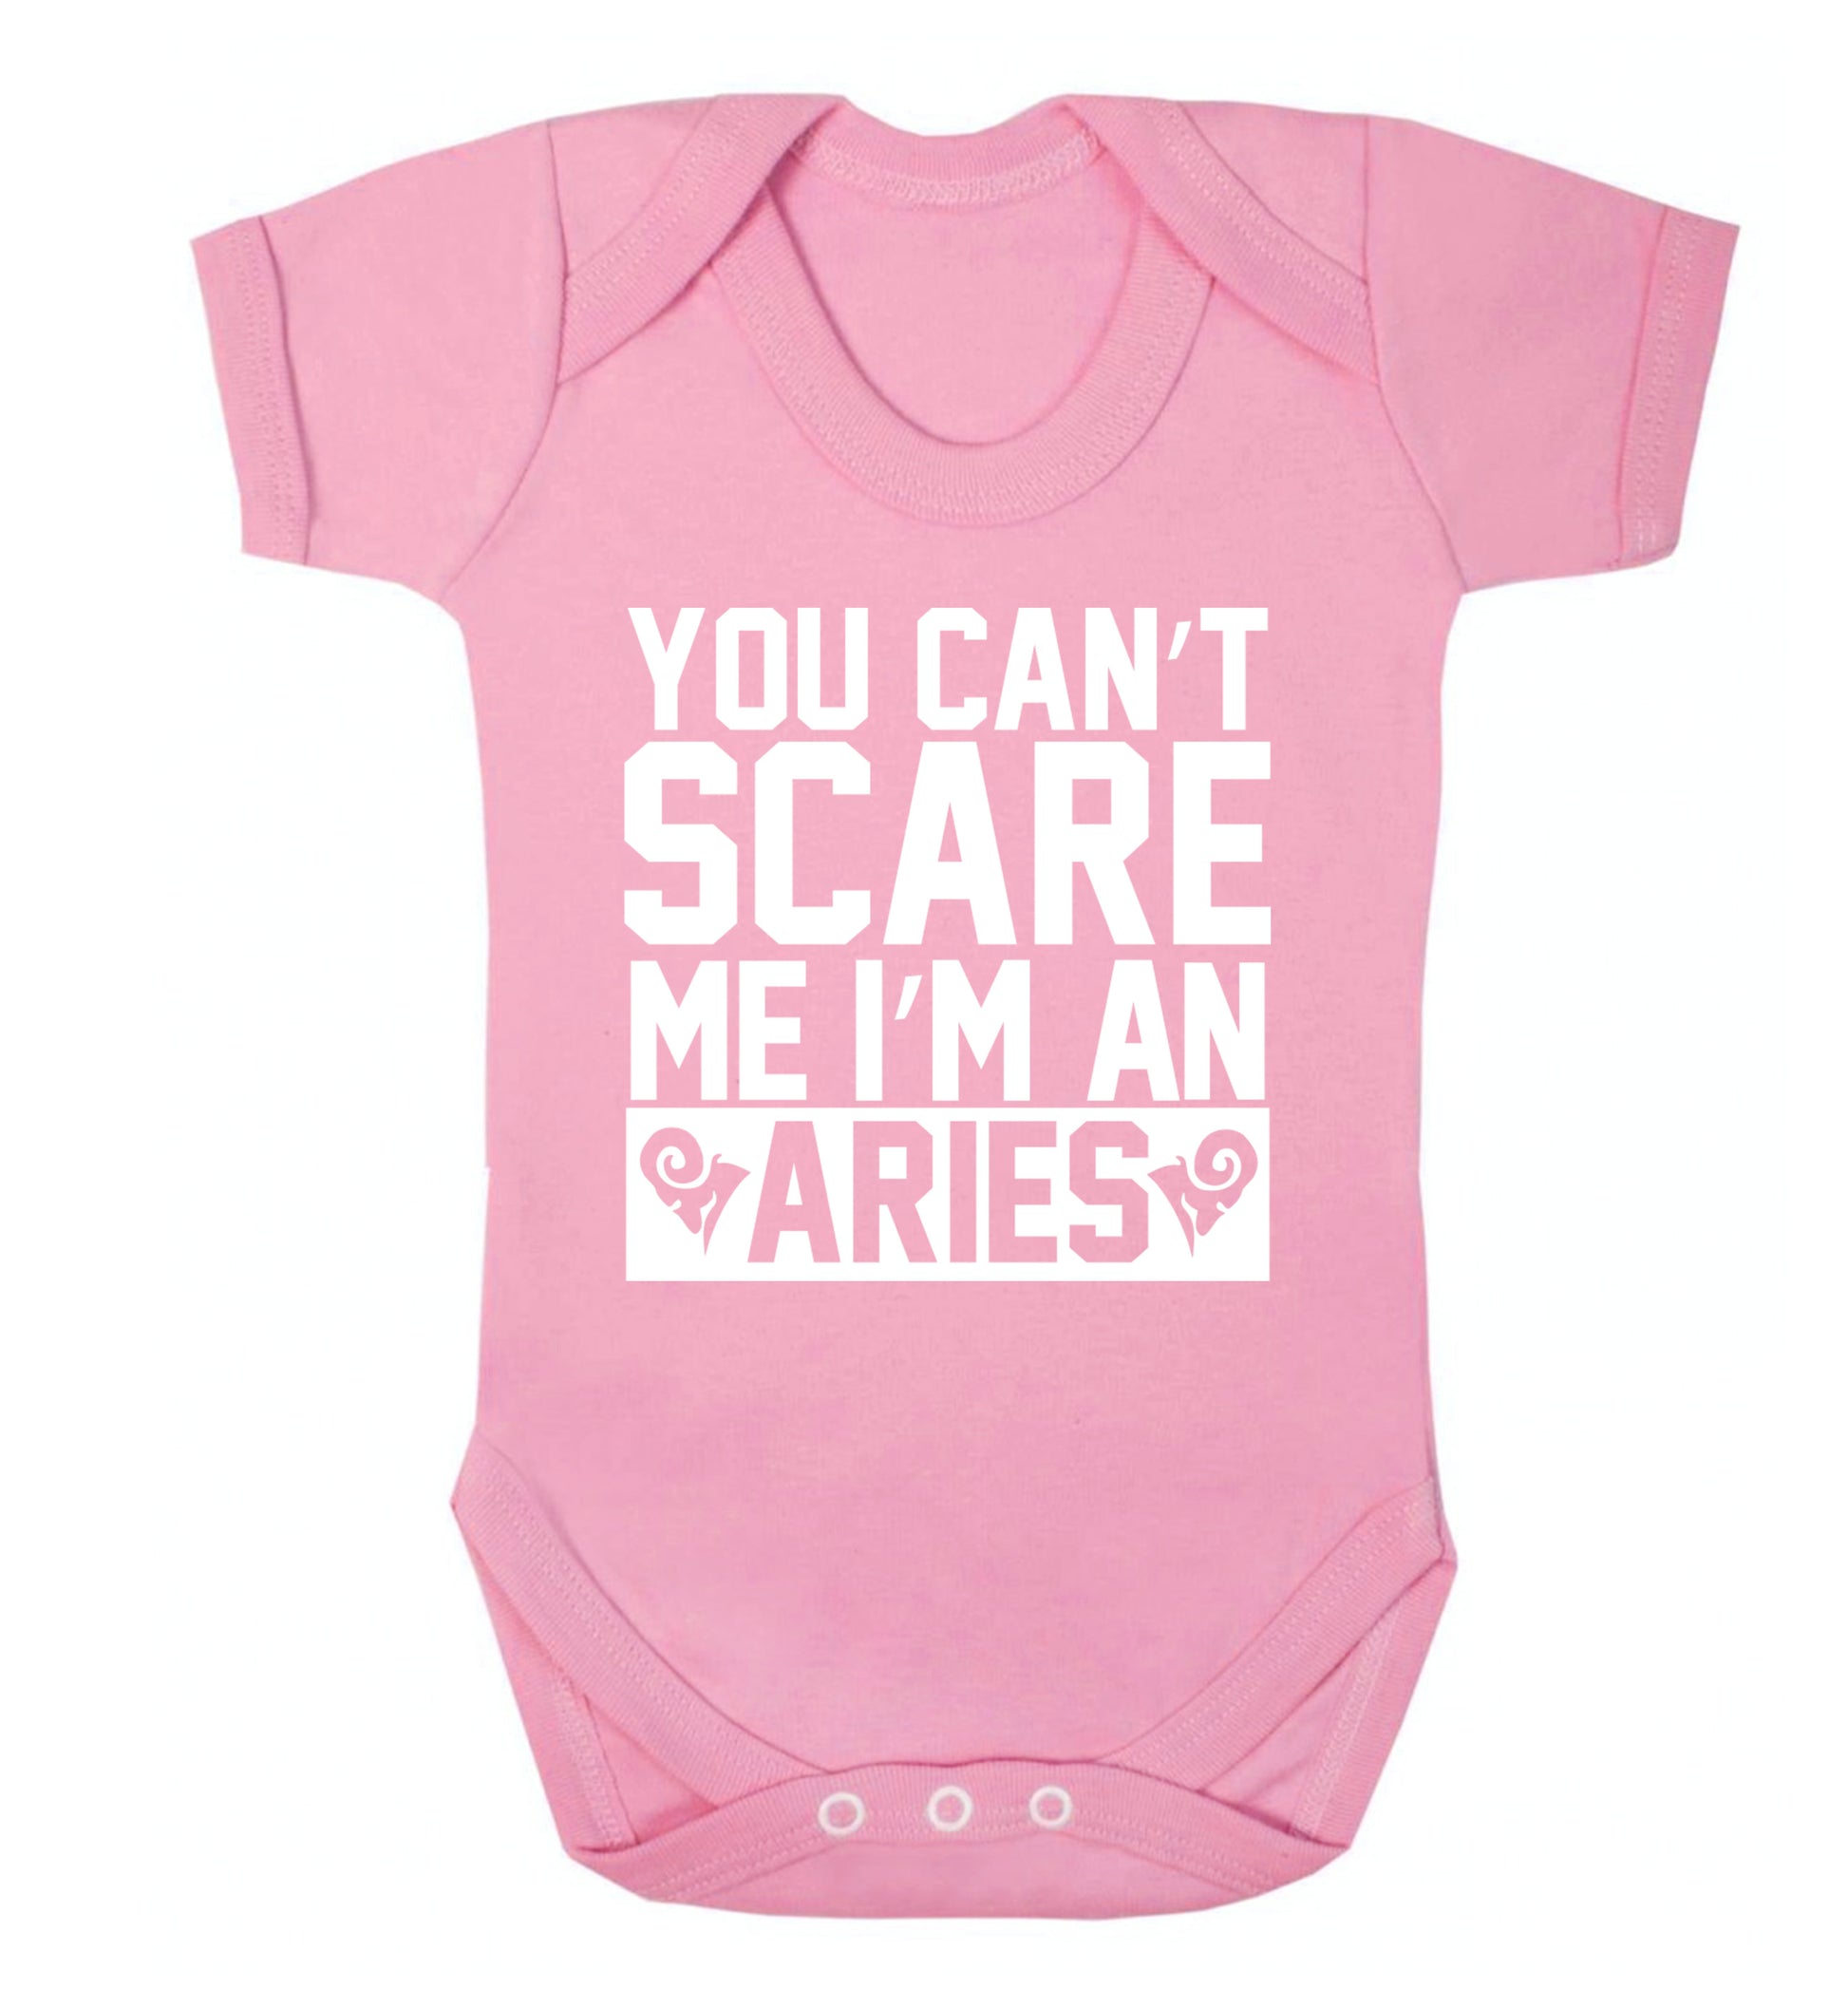 You can't scare me I'm an aries Baby Vest pale pink 18-24 months